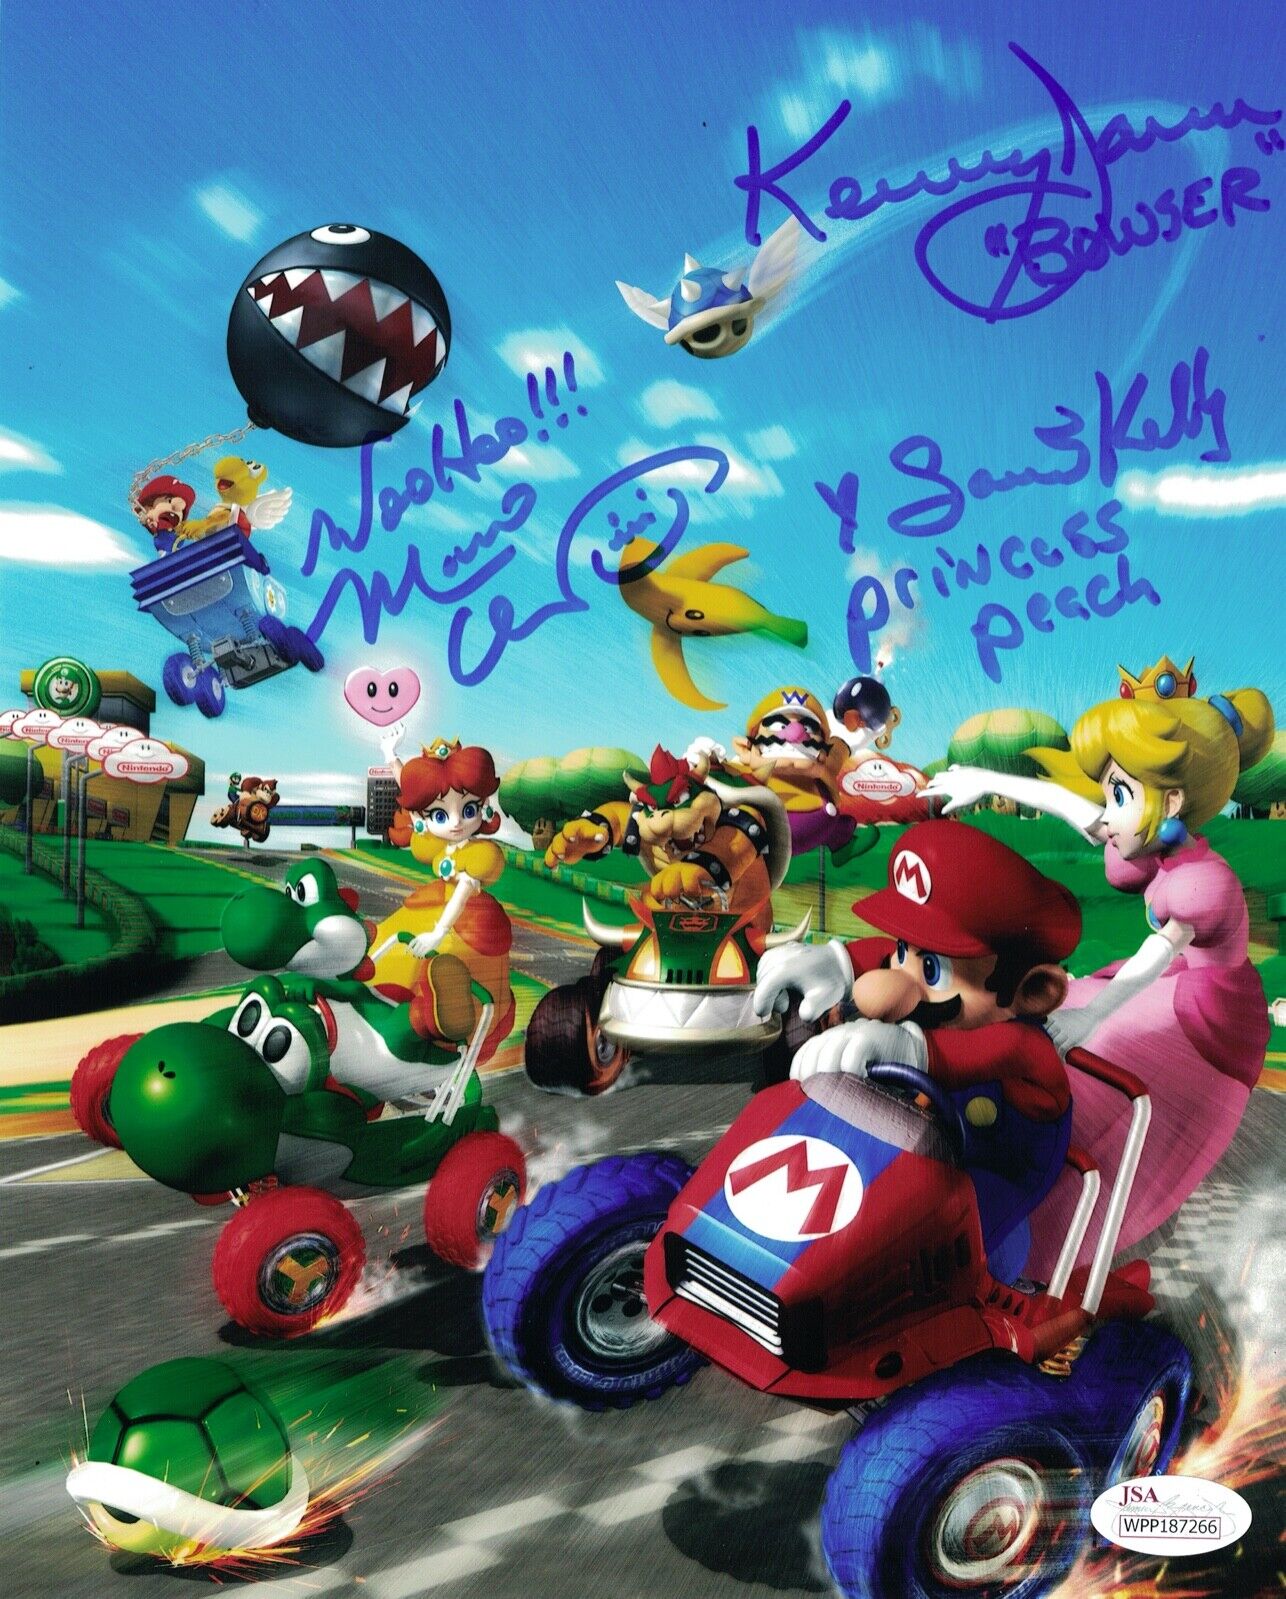 Charles Martinet Super Mario Bros Cast x3 Signed 8x10 Photo Poster painting Autograph JSA COA